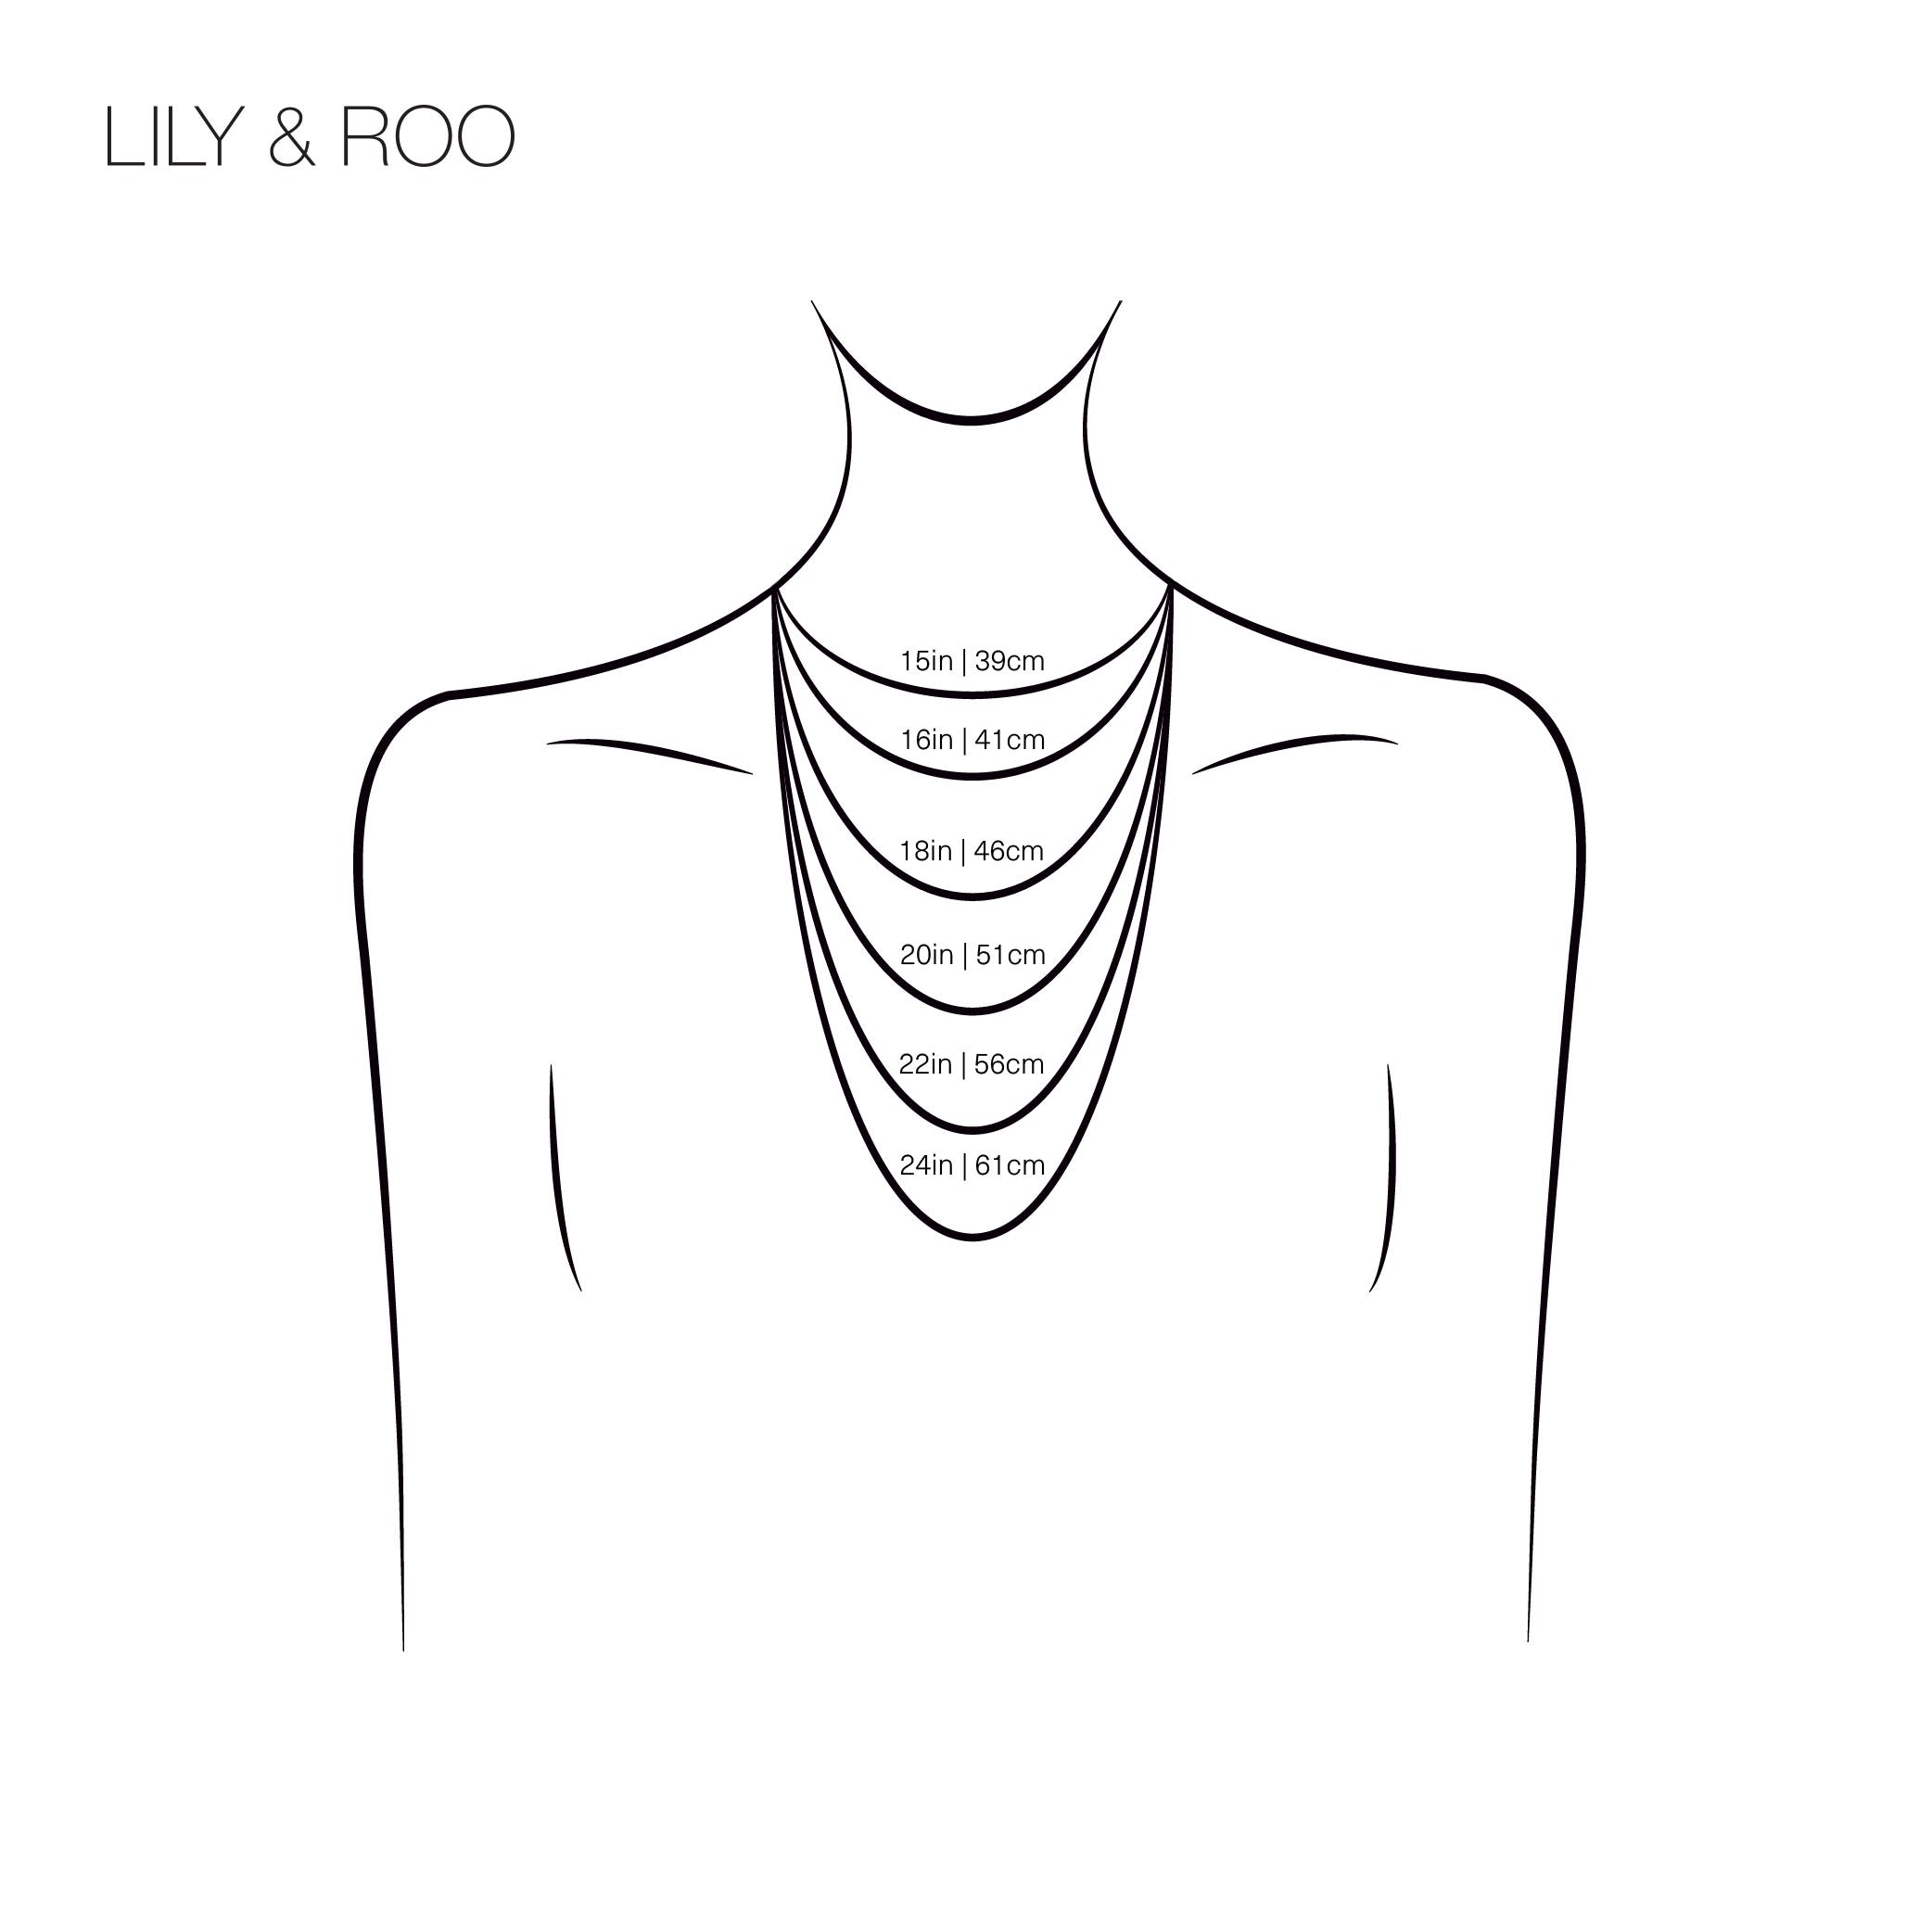 A drawing of different length necklaces on a woman's body with their different lengths labelled in centimeters